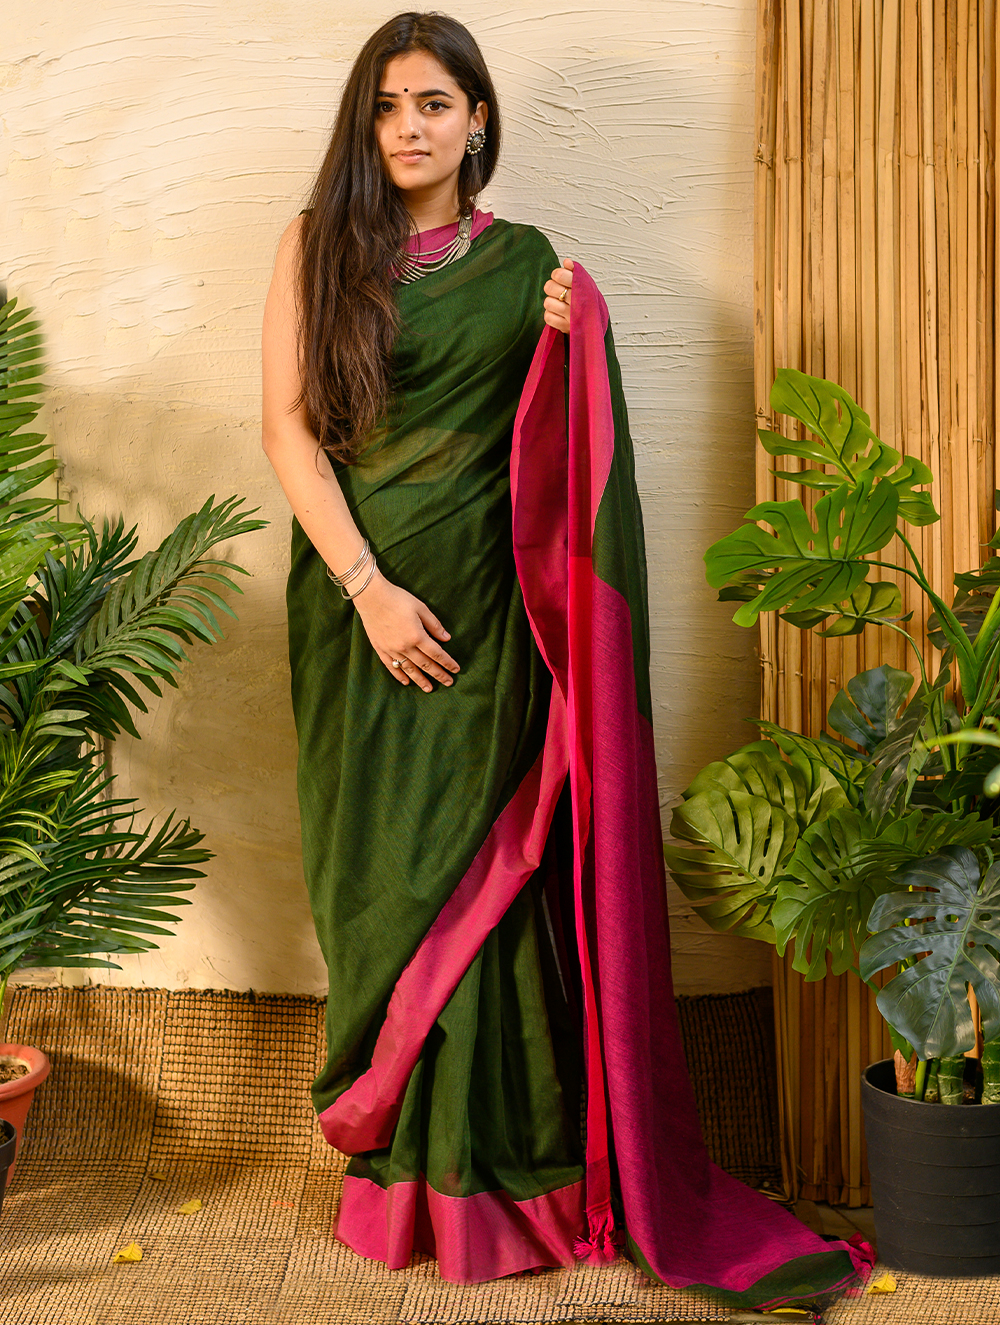 Load image into Gallery viewer, Soft &amp; Striking. Pure Handwoven Linen Saree (With Blouse Piece) - Warm Green